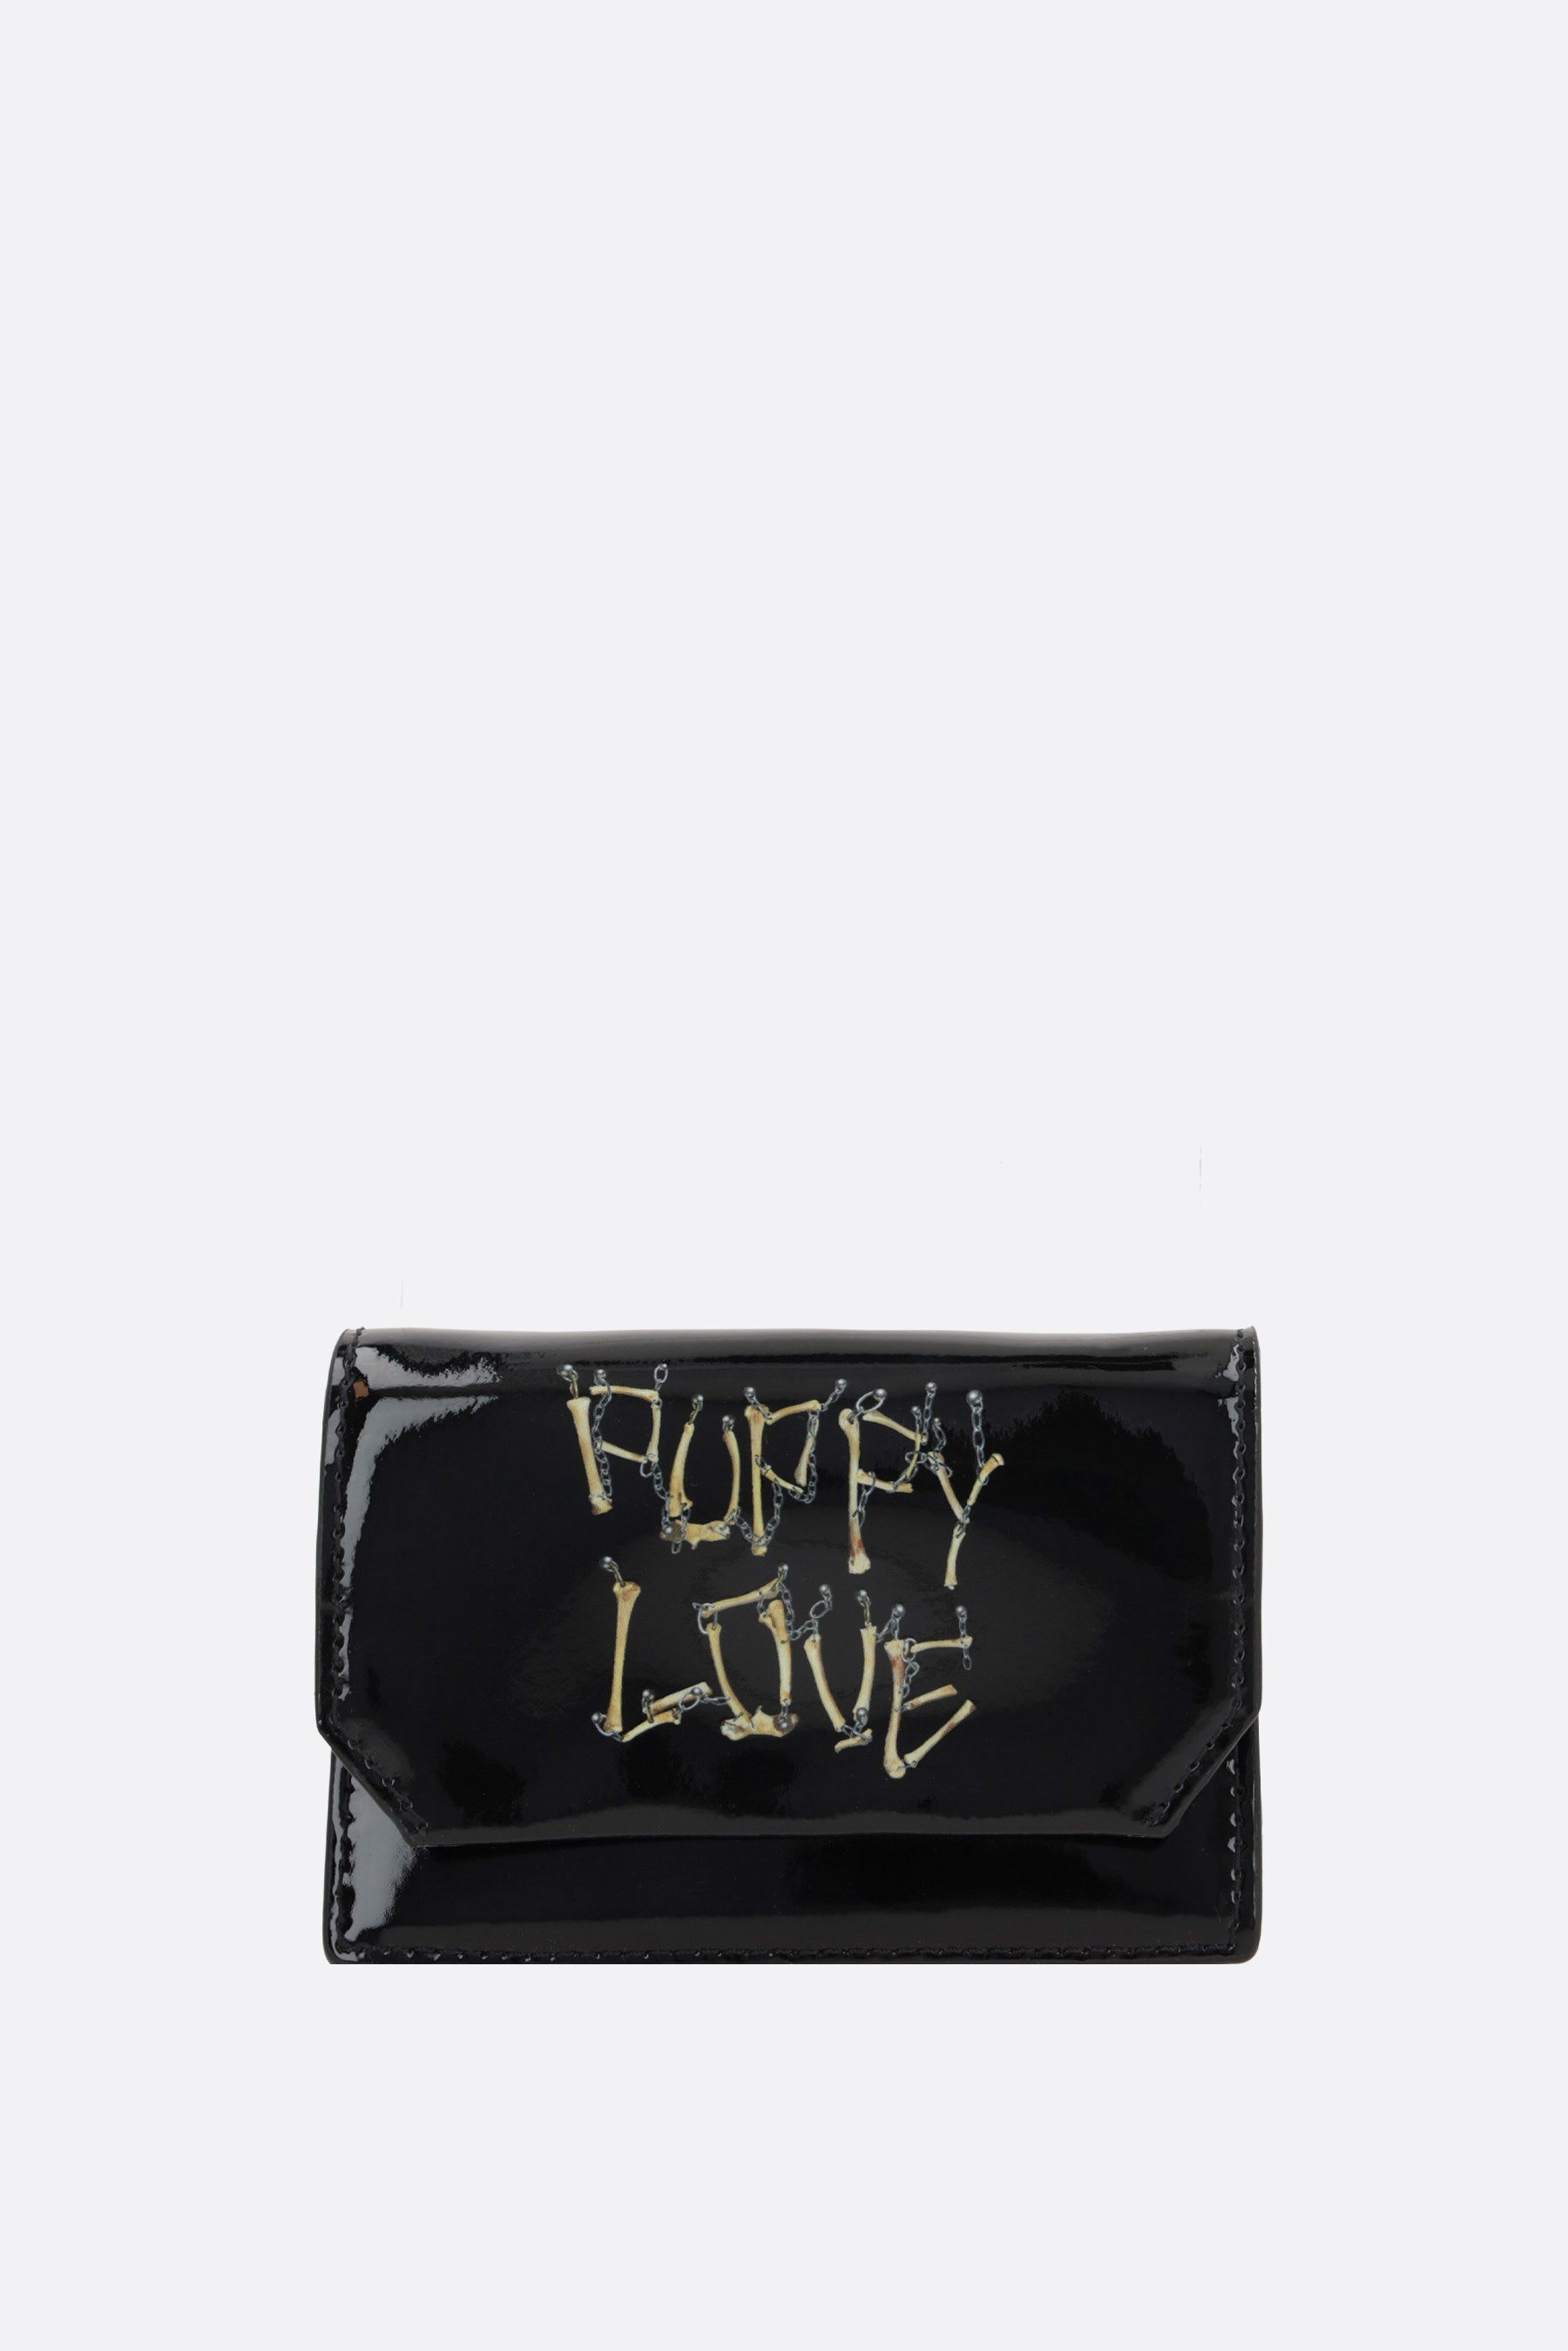 Puppy Love patent leather card case with strap